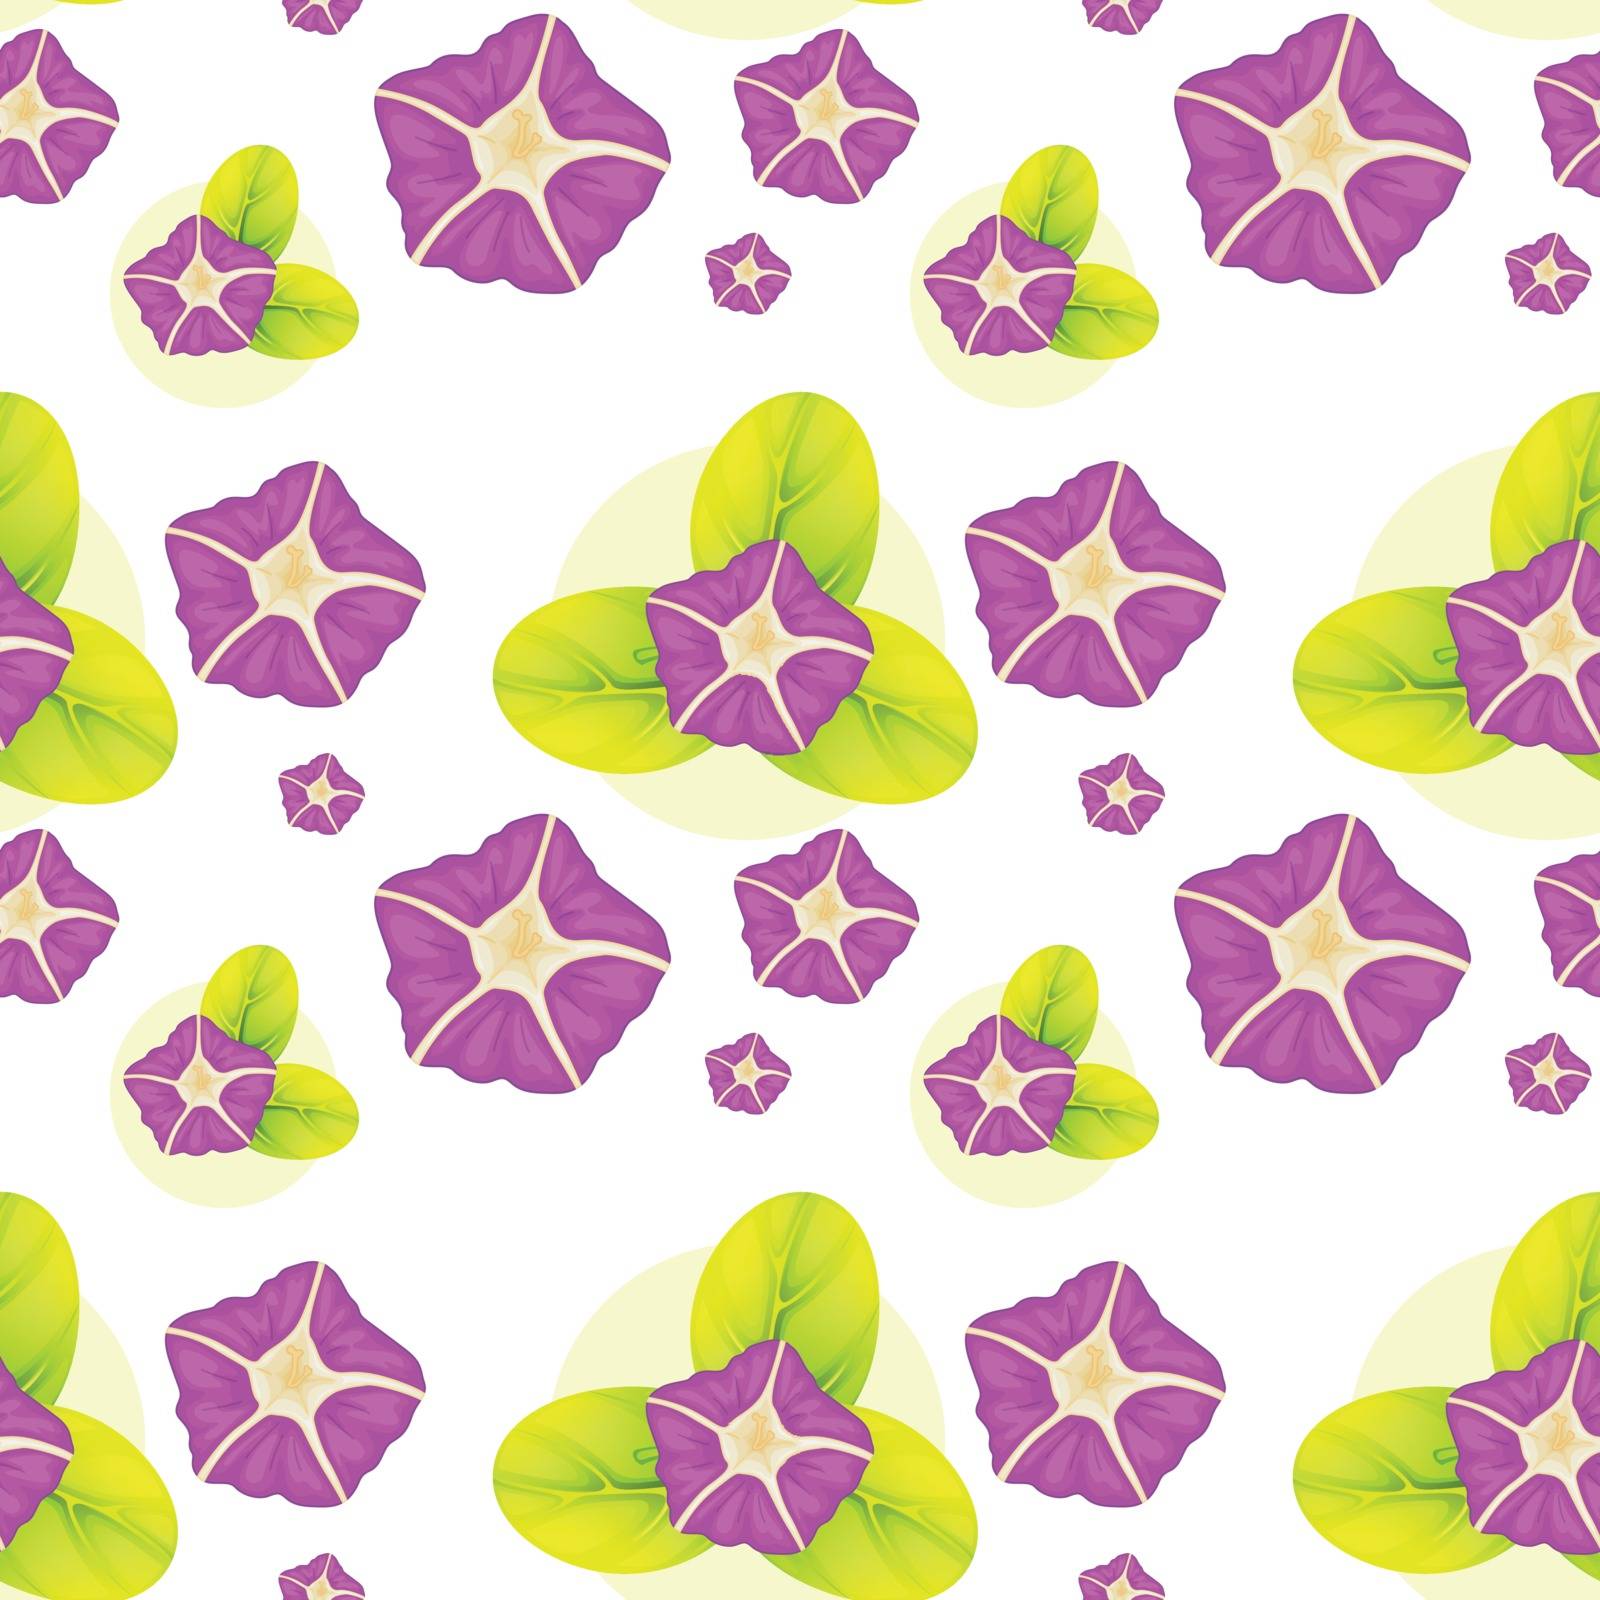 Illustration of a background with violet flowers on a white background